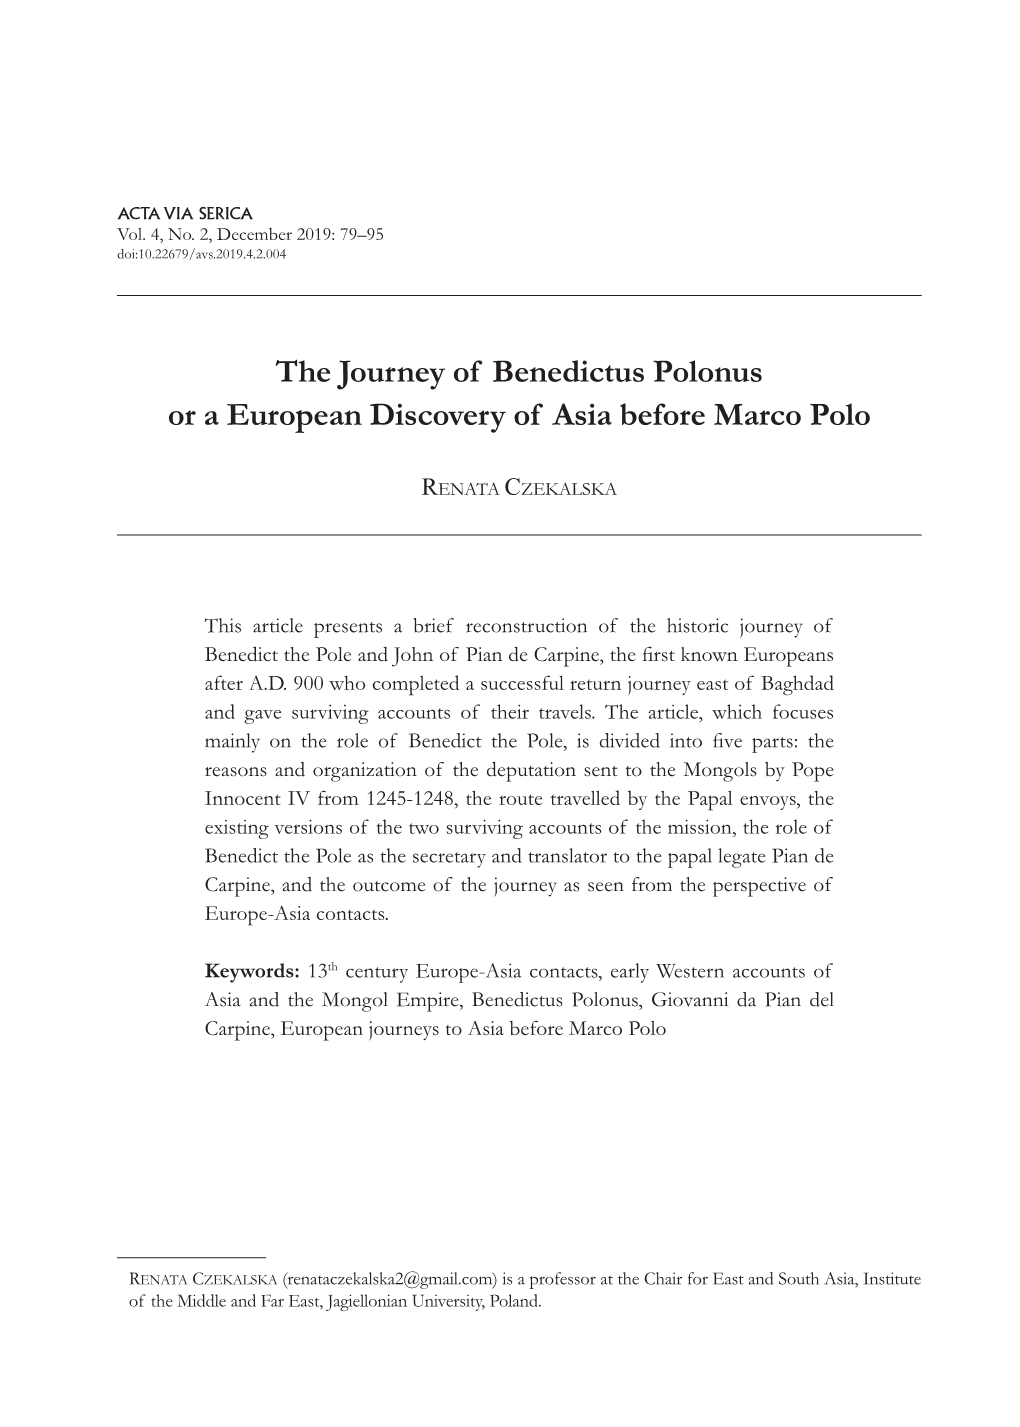 The Journey of Benedictus Polonus Or a European Discovery of Asia Before Marco Polo